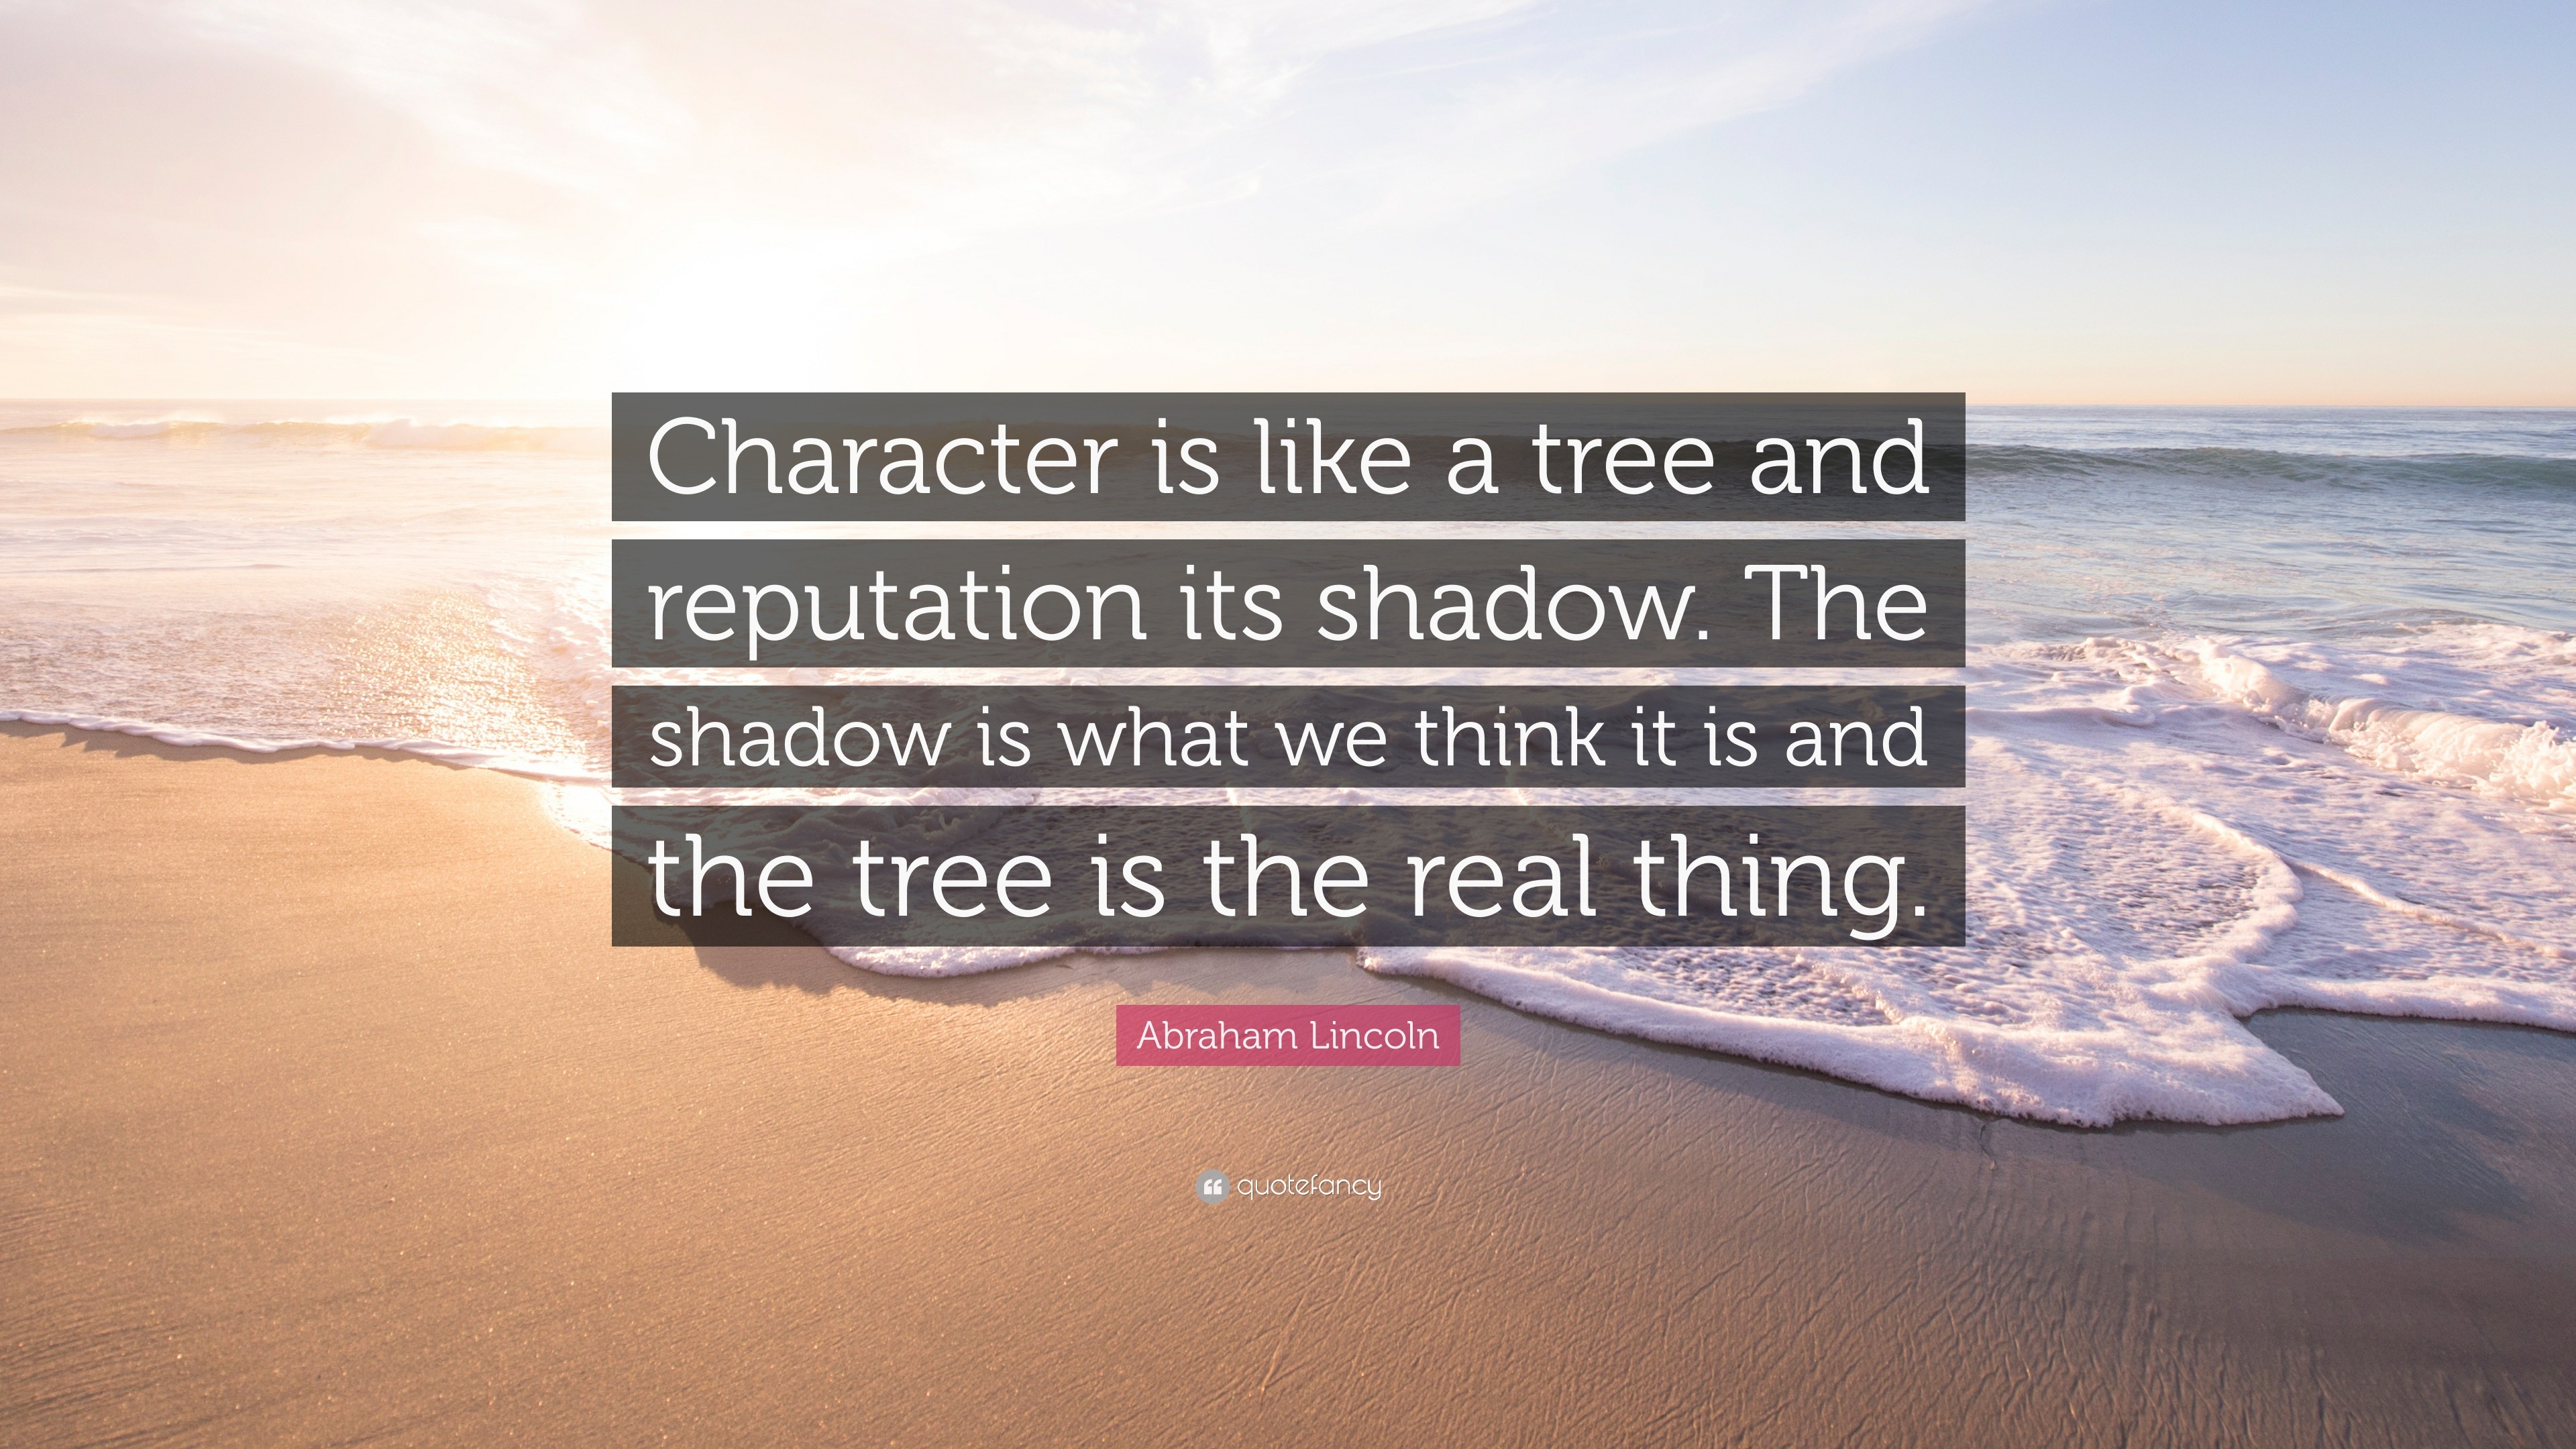 Abraham Lincoln Quote “Character is like a tree and reputation its shadow The